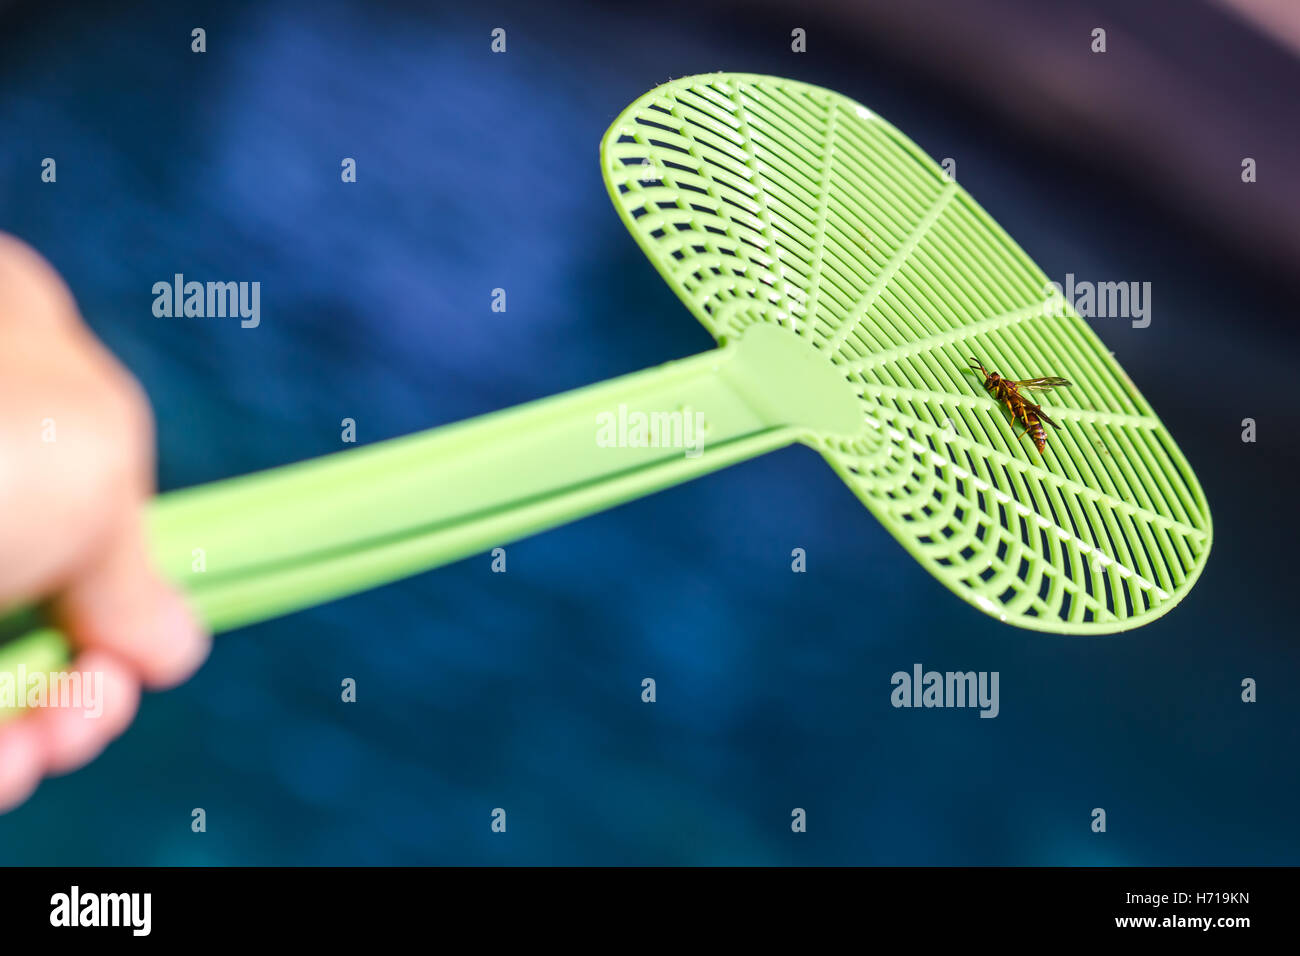 Smashed wasp on a green fly swatter Stock Photo